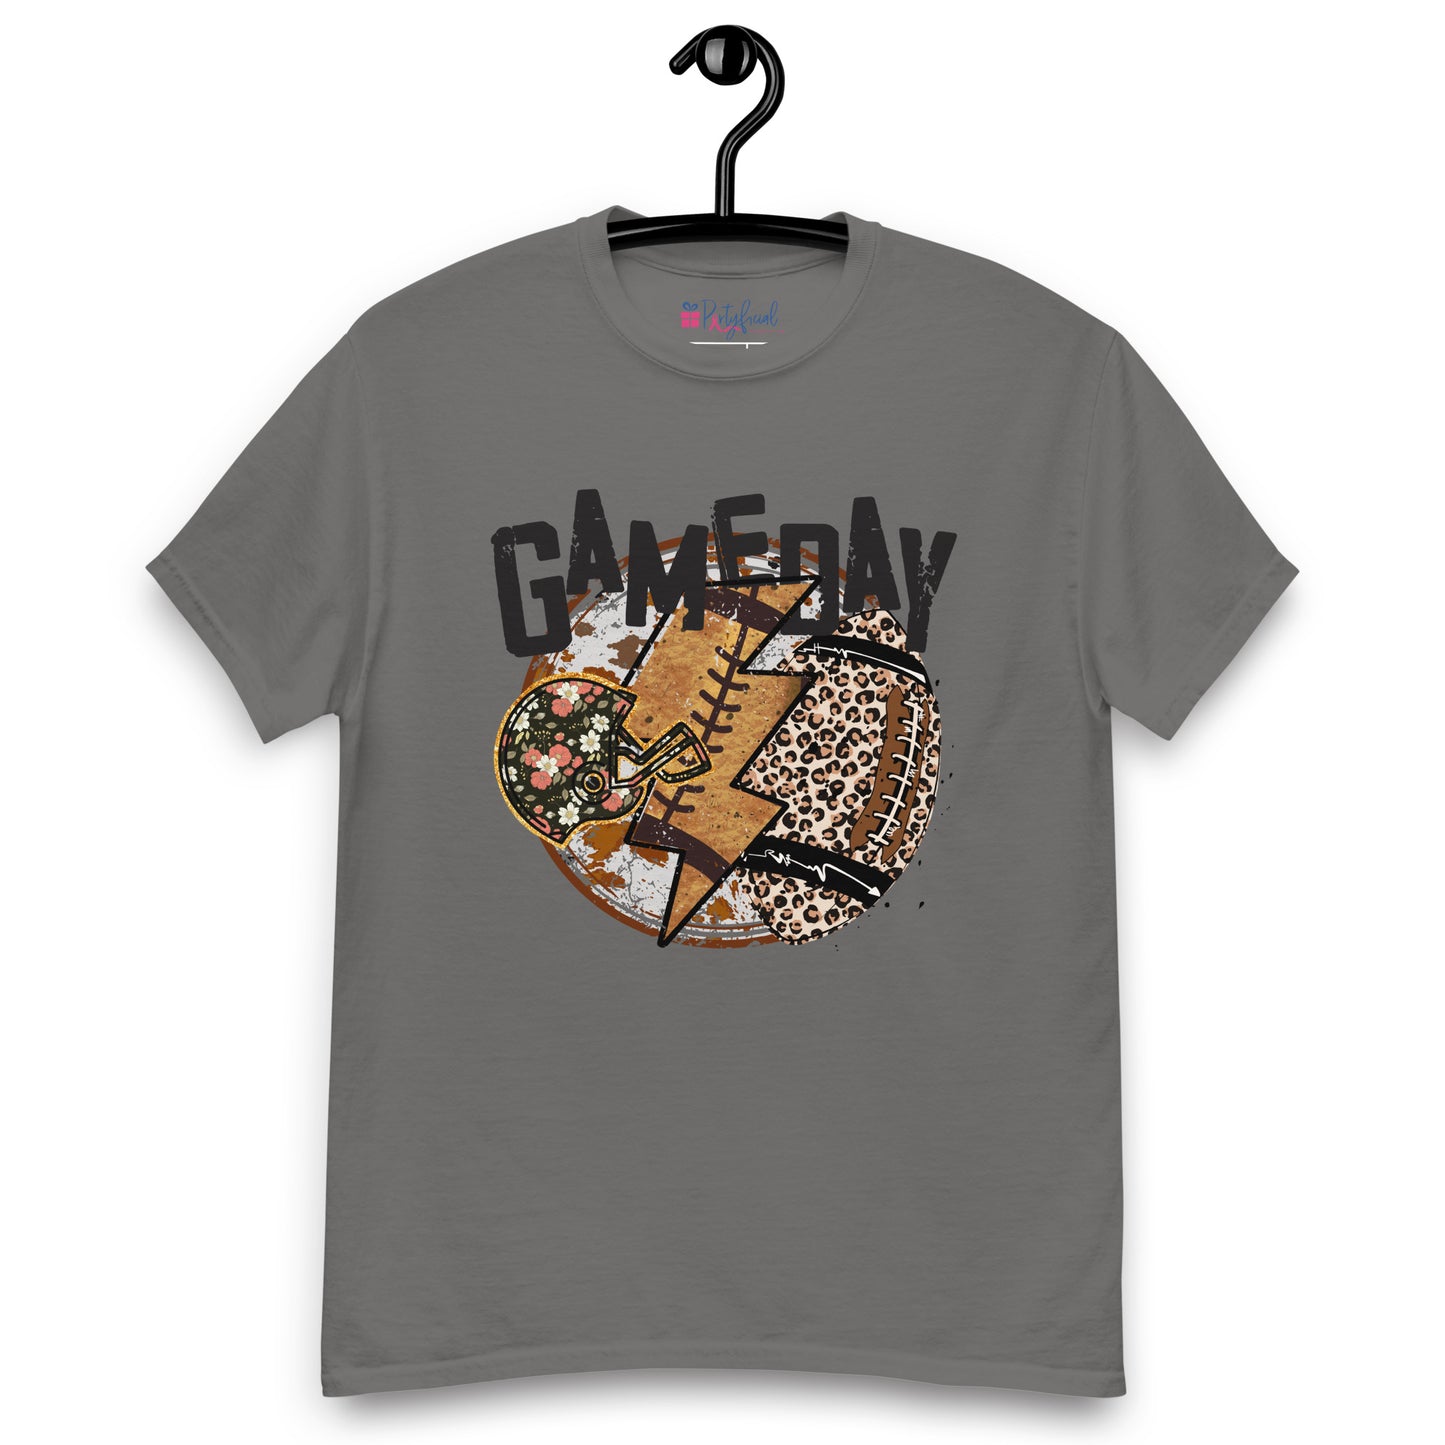 Game Day tee